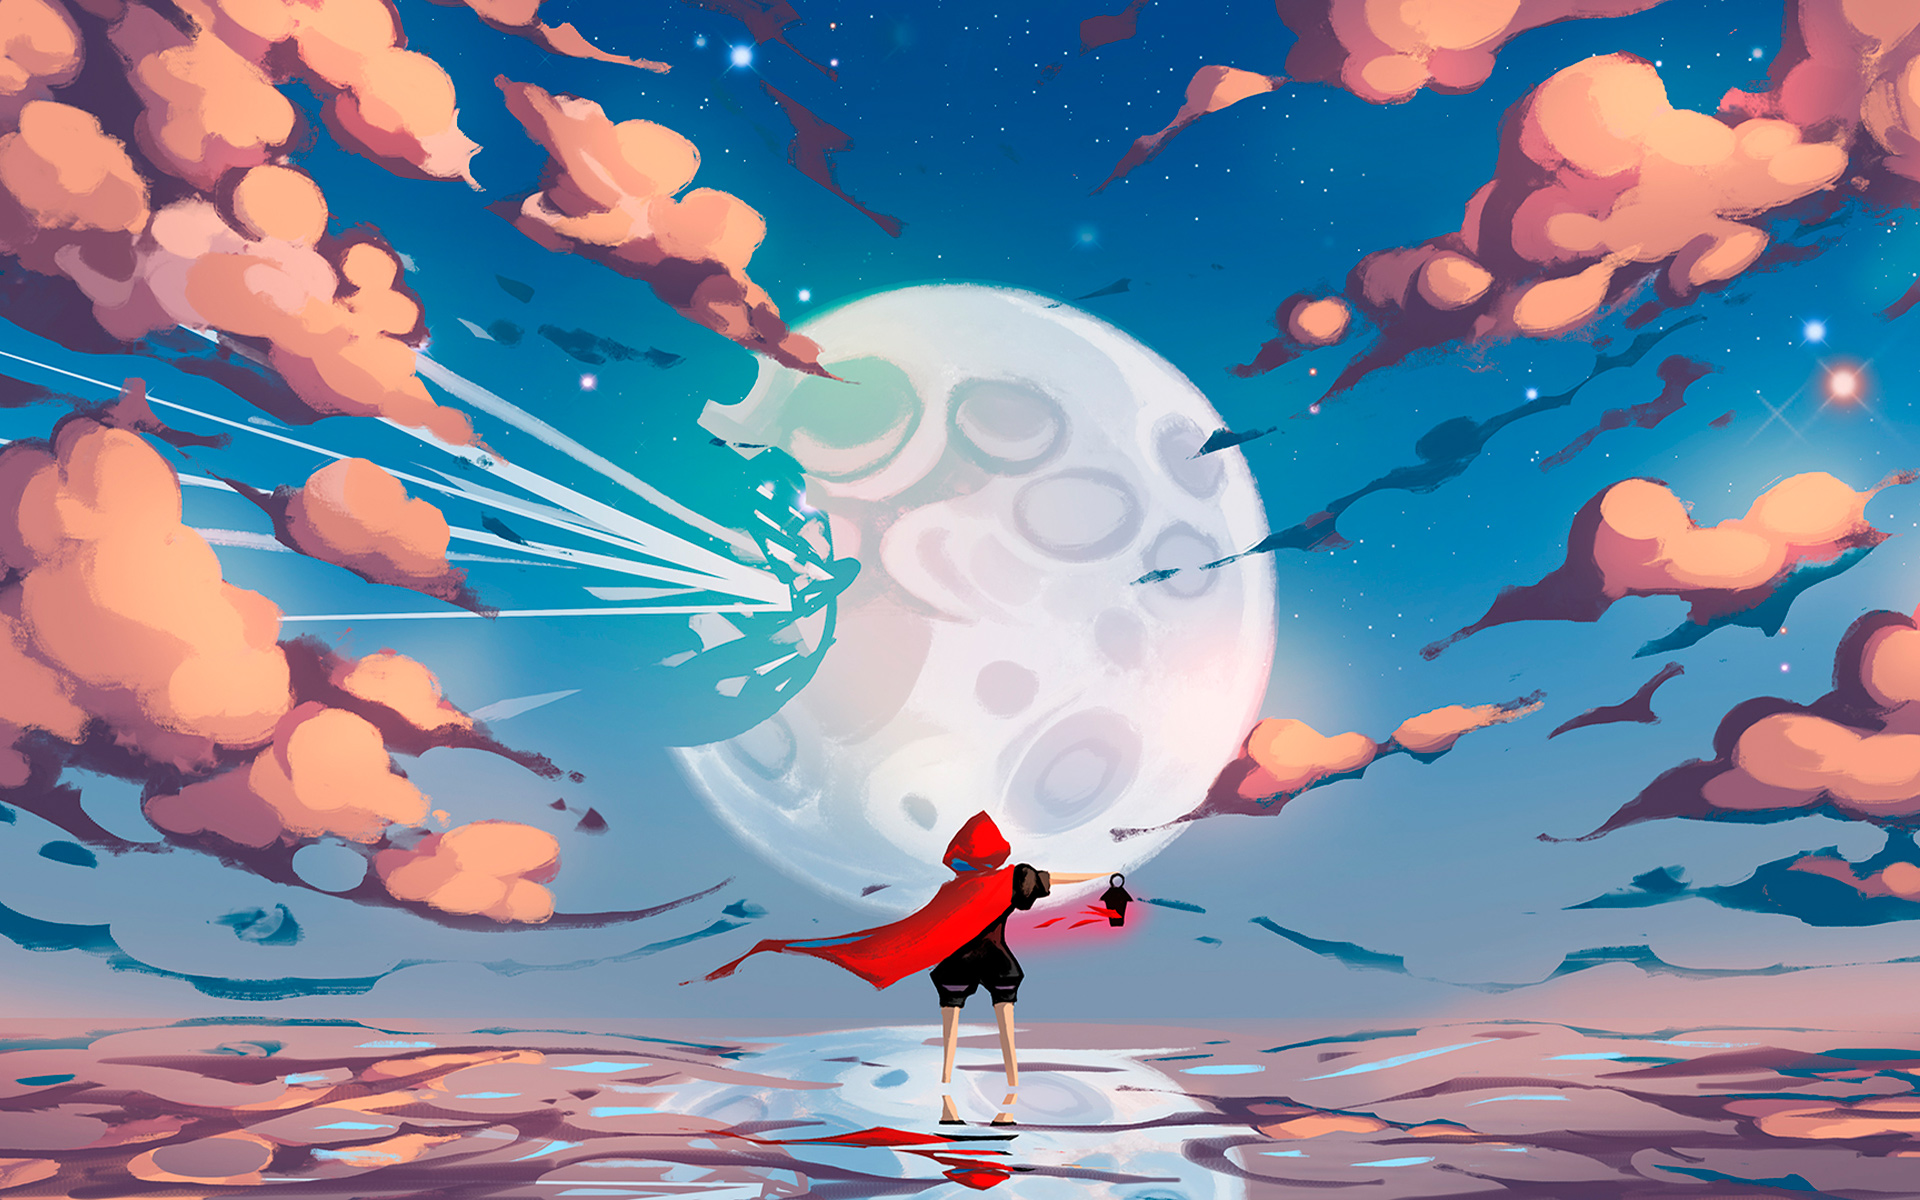 Desktop Wallpaper Red Riding Hood Clouds Moon Artwork, HD Image, Picture, Background, Cskfts